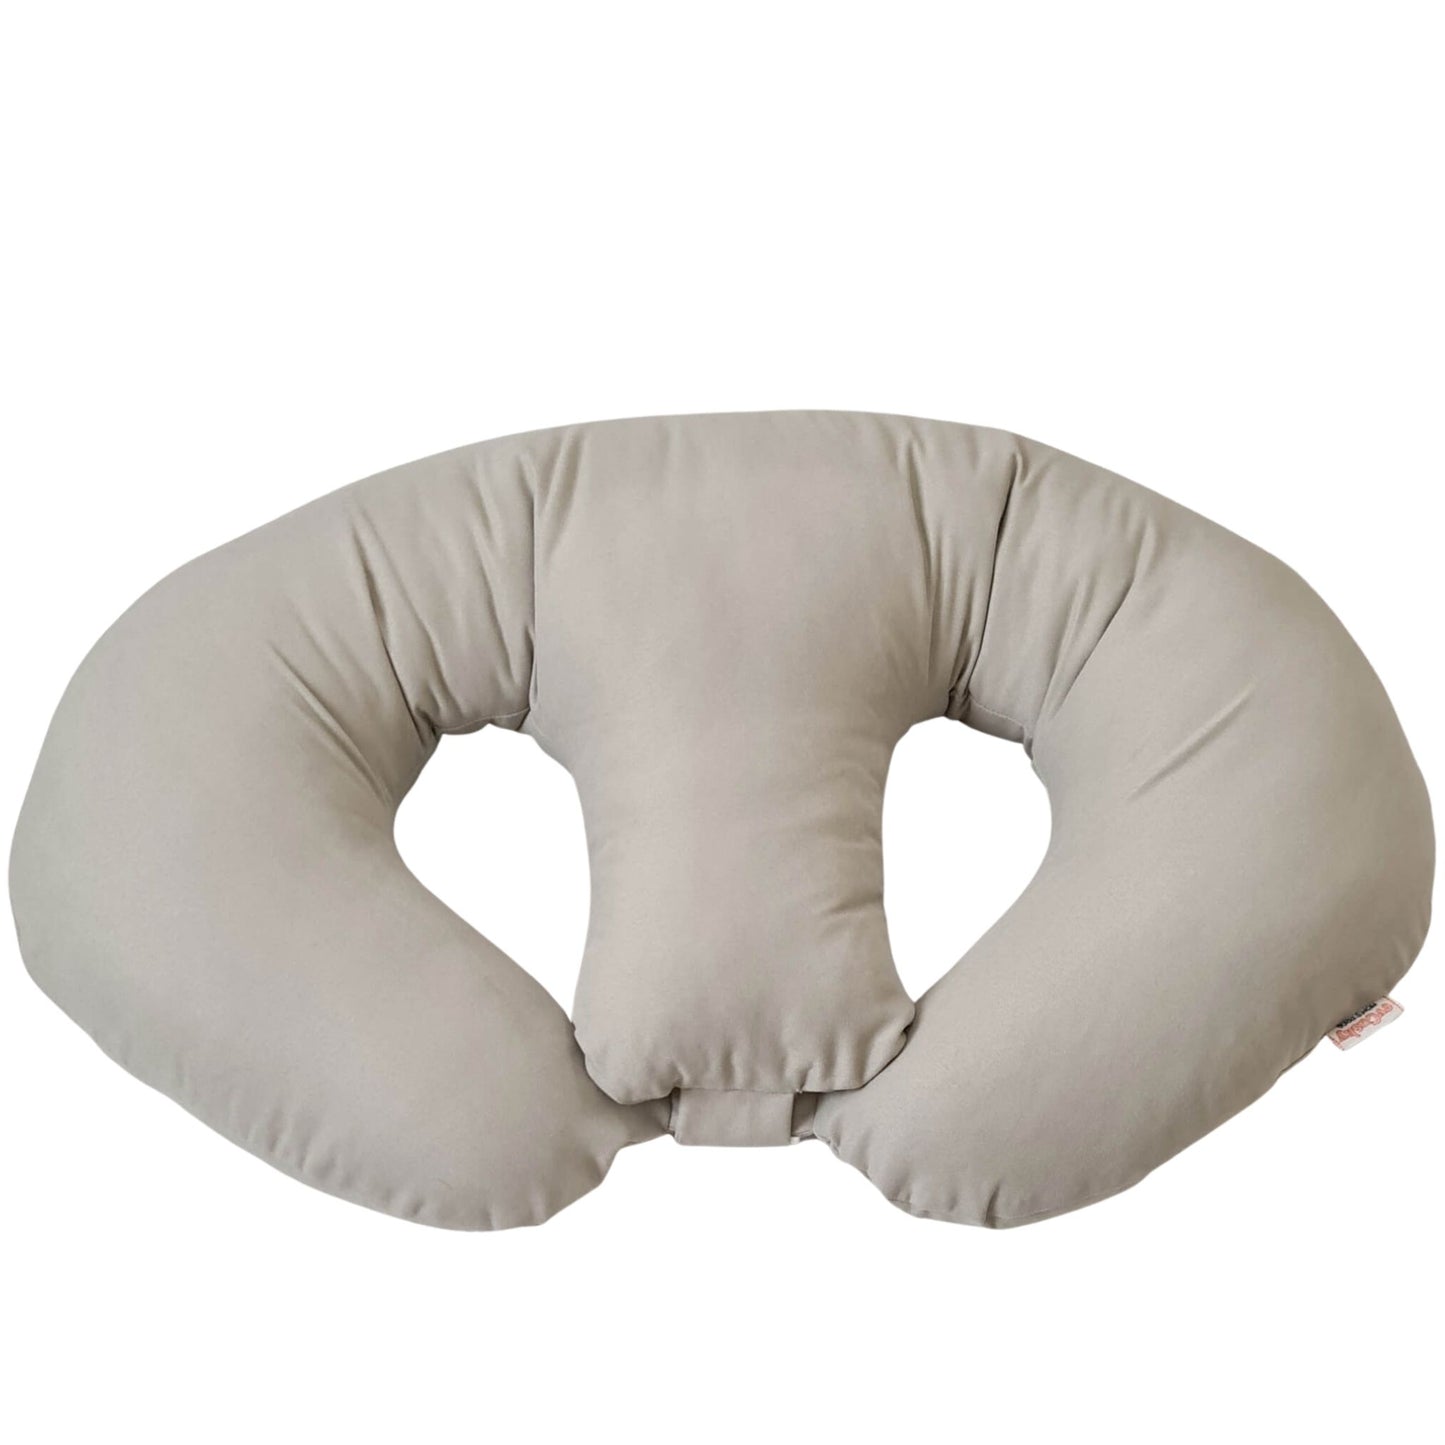 Featuring a neutral design, this pillow is created with a unique shape, specially designed to support twins whilst breastfeeding. With a removable, machine washable cover